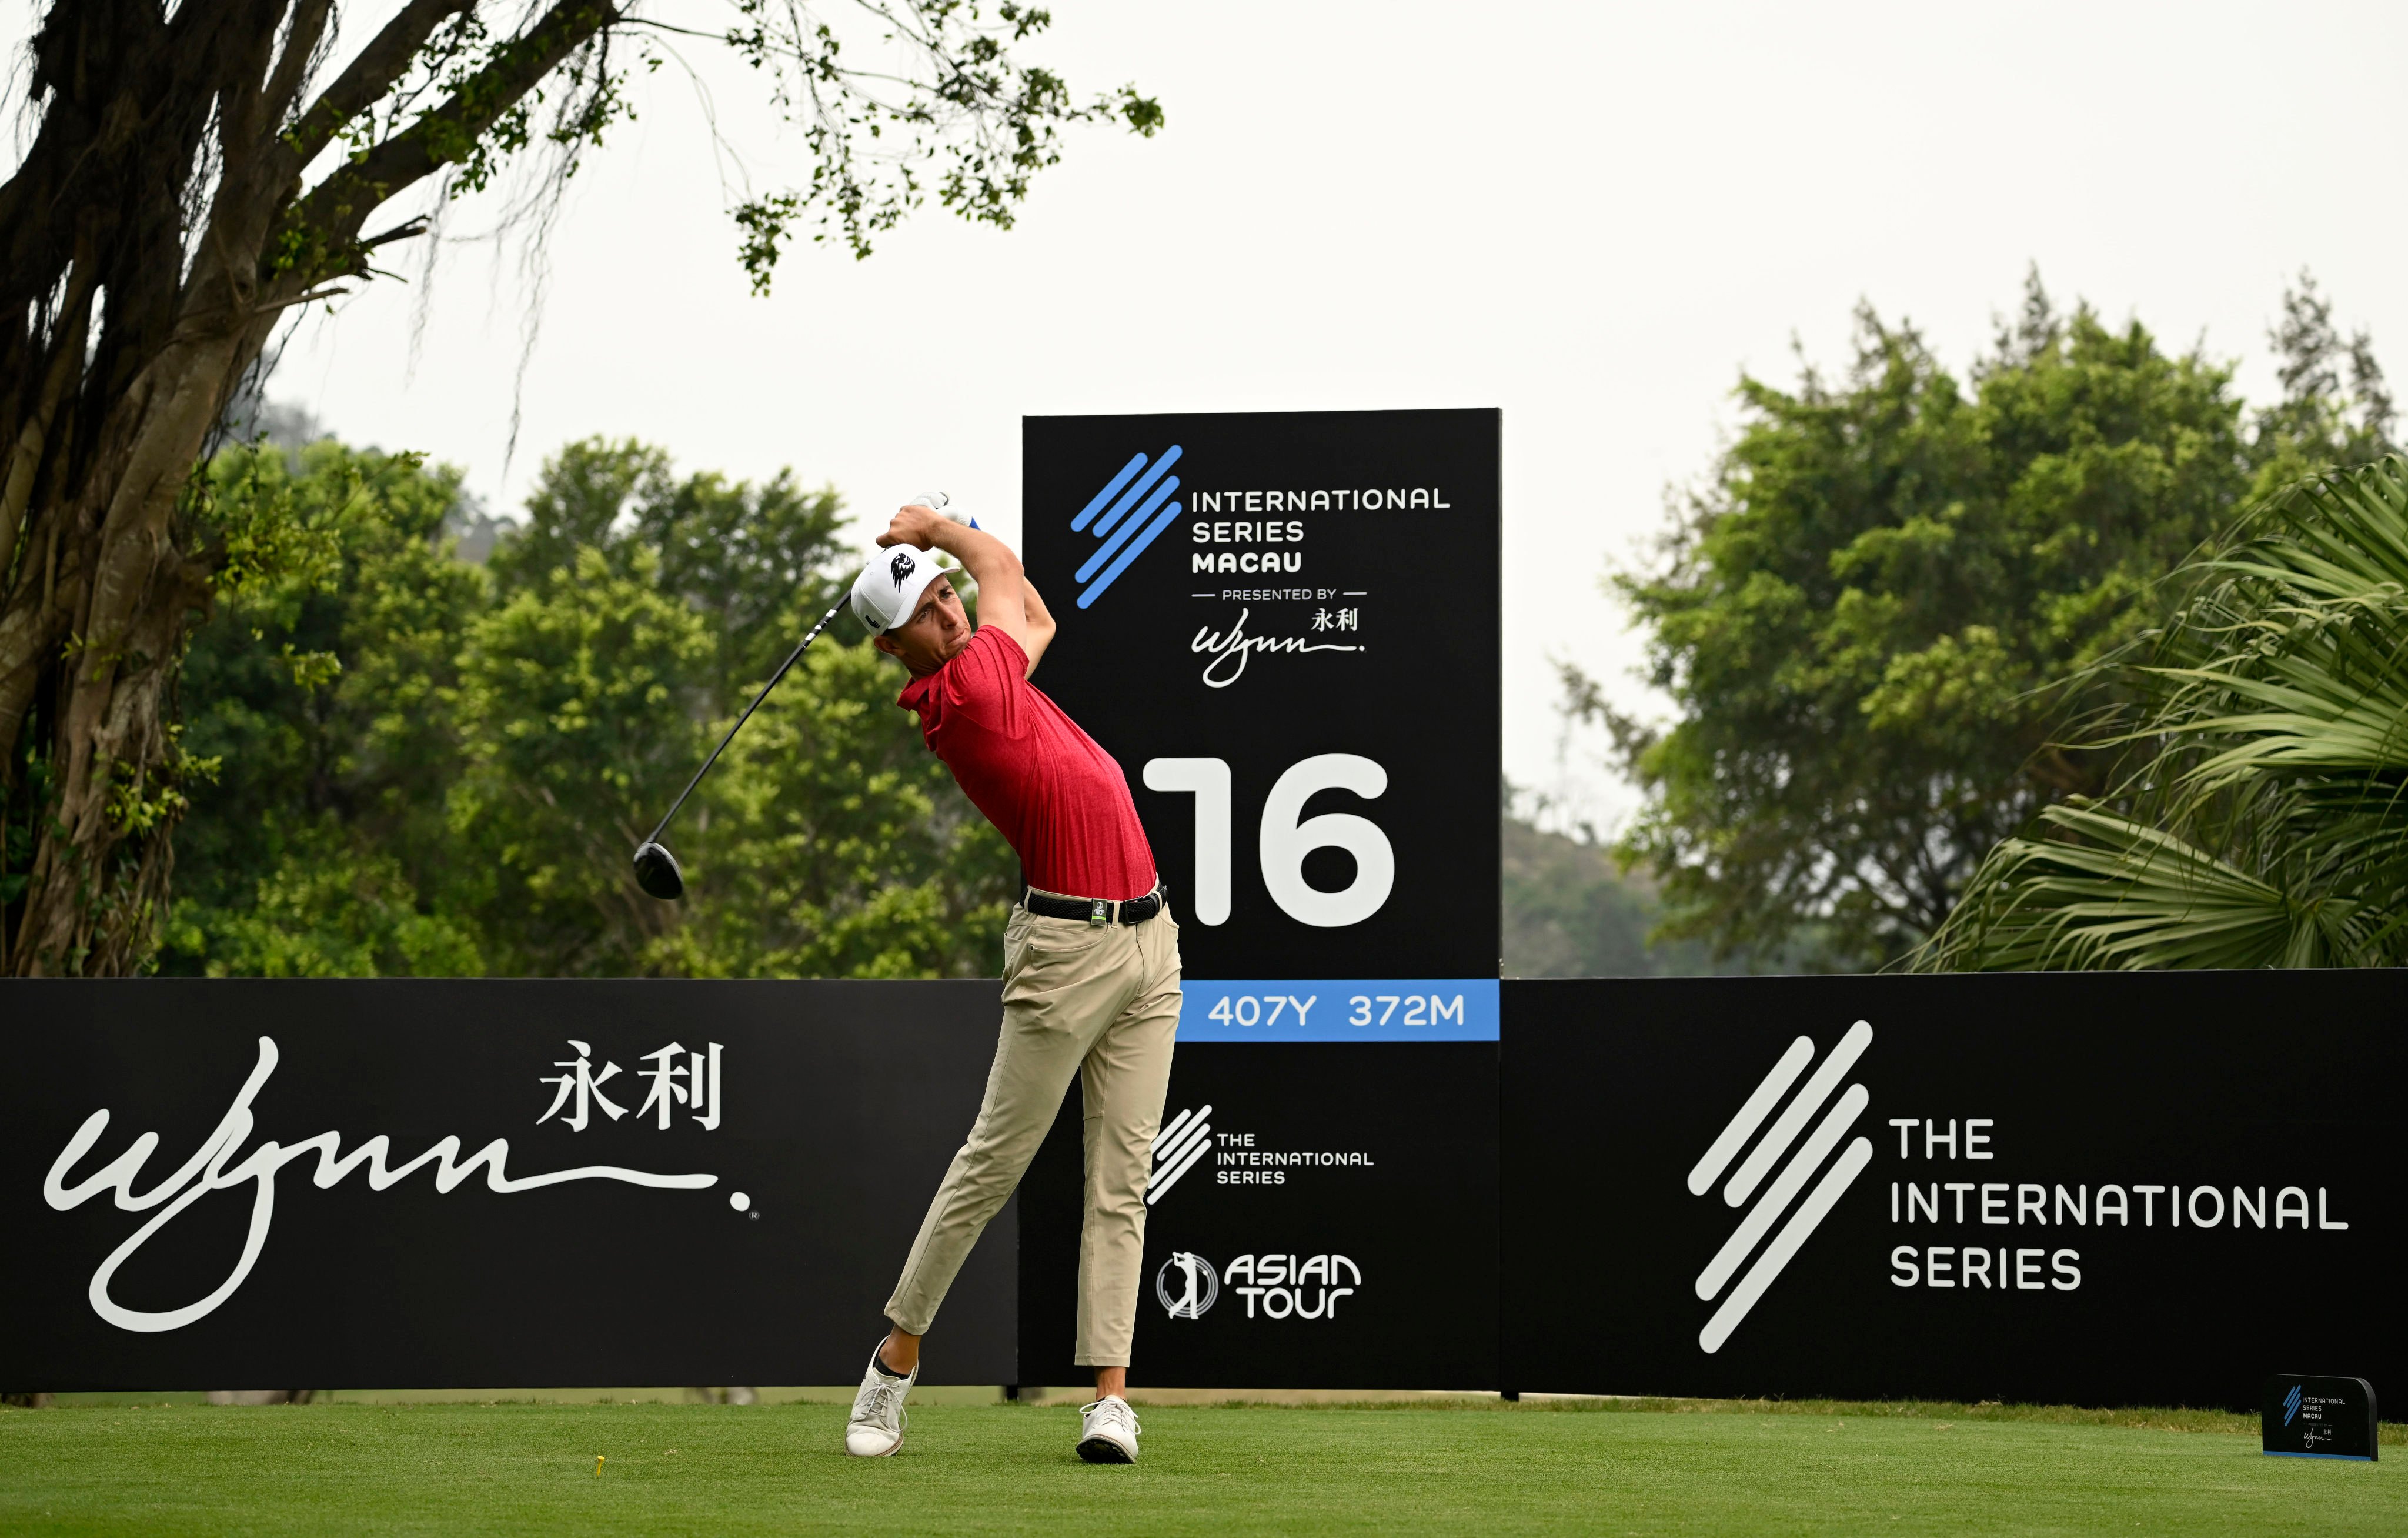 MACAU, CHINA: David Puig of Spain pictured during Round One on Thursday March 14, 2024, at the International Series Macau, presented by Wynn, at the Macau Golf and Country Club. The US$2 million Asian Tour event is staged from March 14-17, 2024. Picture by Paul Lakatos/Asian Tour.